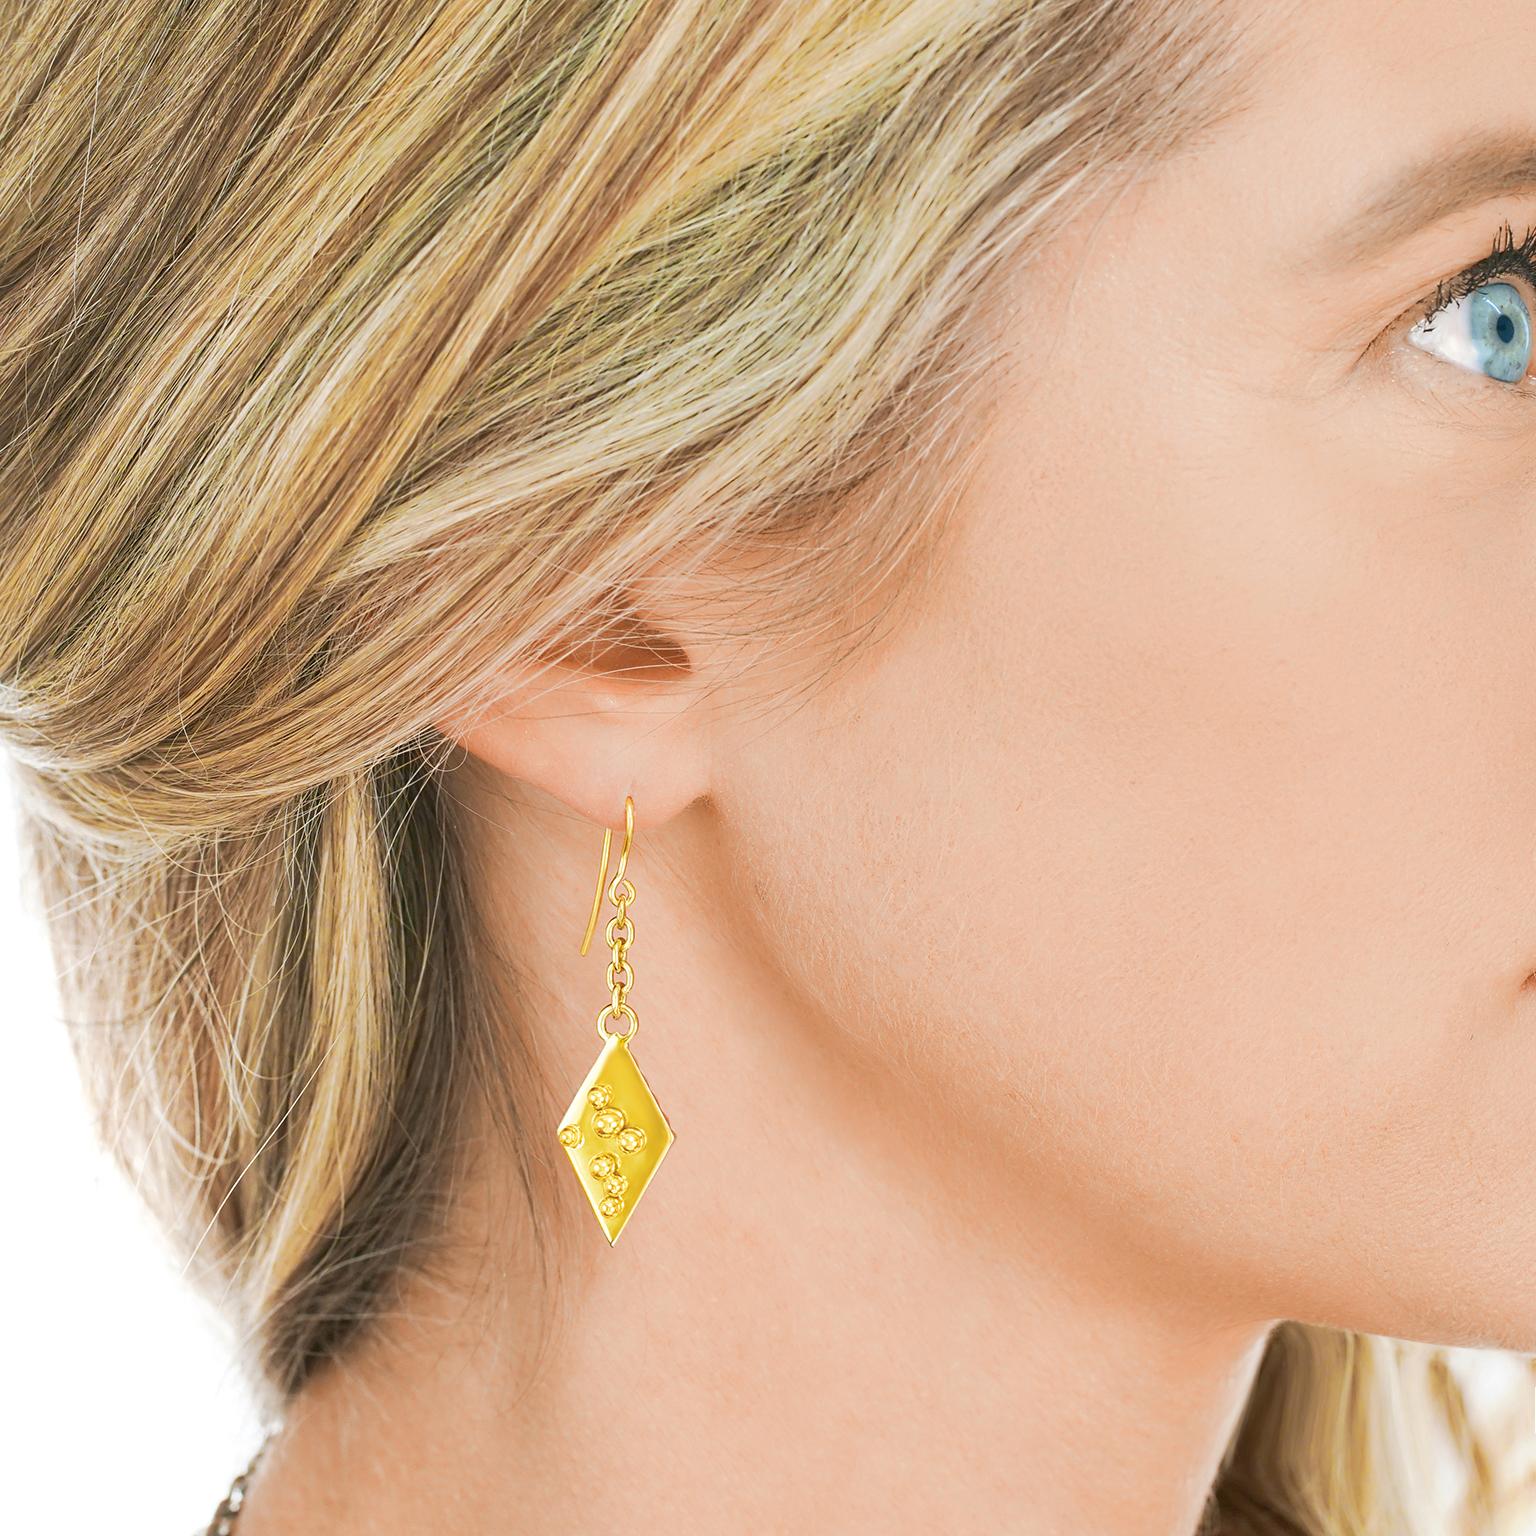 Artisan Peter Aylen American Crafter Gold Earrings For Sale